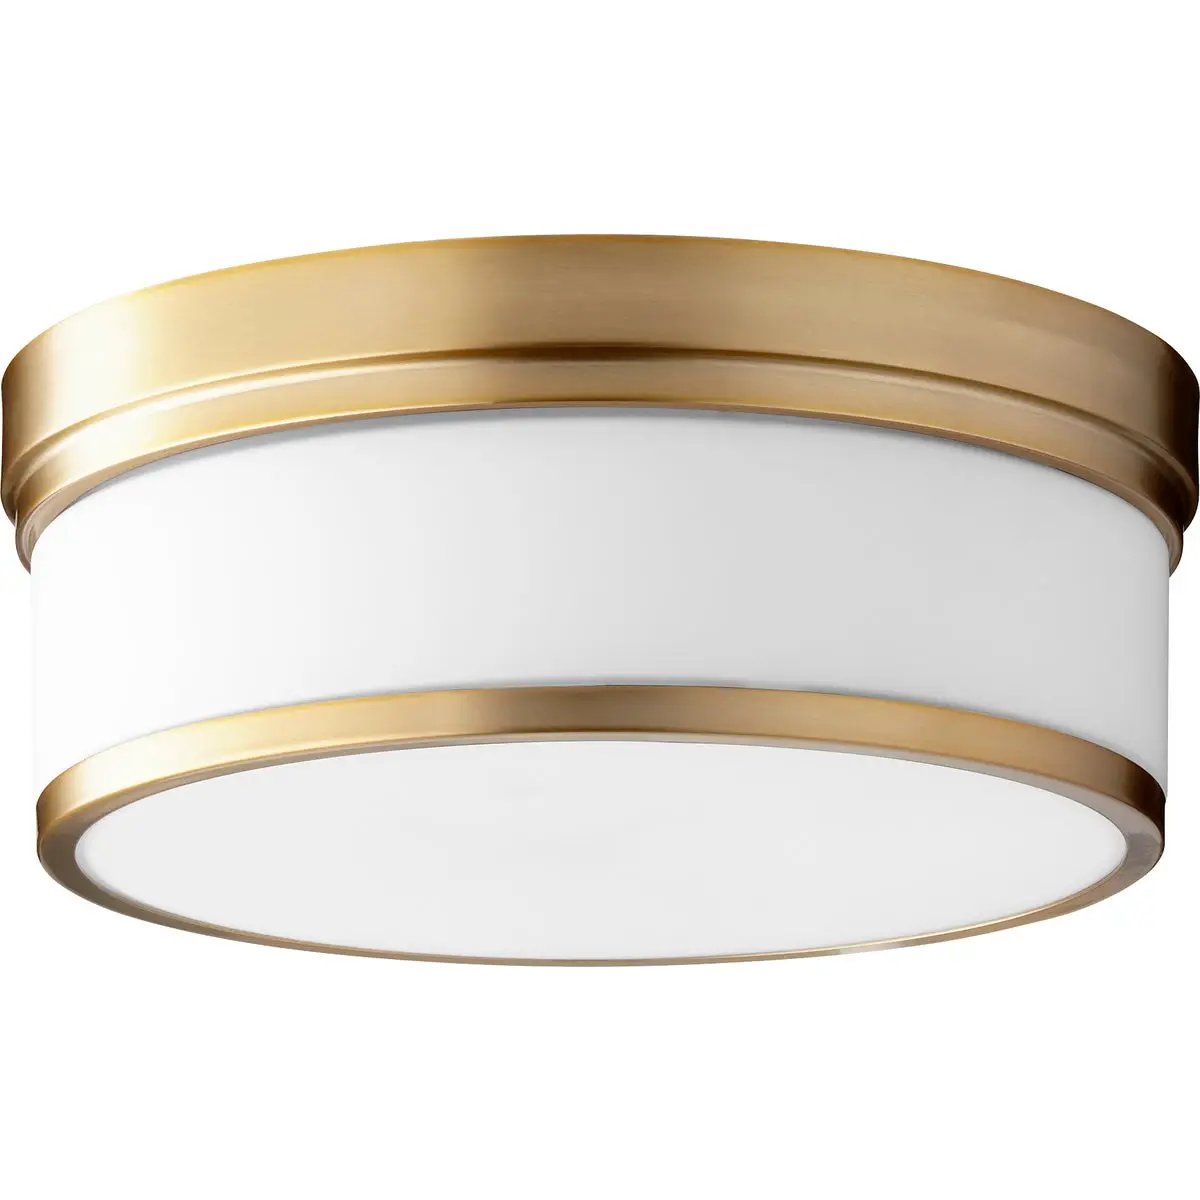 A modern flush mount light fixture with a gold rim and a white shade, adding futuristic luxury to any space. Brand: Quorum International. Wattage: 60W. Input Voltage: 120V. Number of Bulbs: 3. Bulbs Included: No. Bulb Base Type: Medium E26. Dimmable: Yes. Certifications: UL Listed. Safety Rating: Damp Location. Finish options: Aged Brass, Aged Silver Leaf, Noir, Oiled Bronze, Polished Nickel, Satin Nickel, Zinc. Dimensions: 14"W x 5.5"H. Warranty: 2 Years.